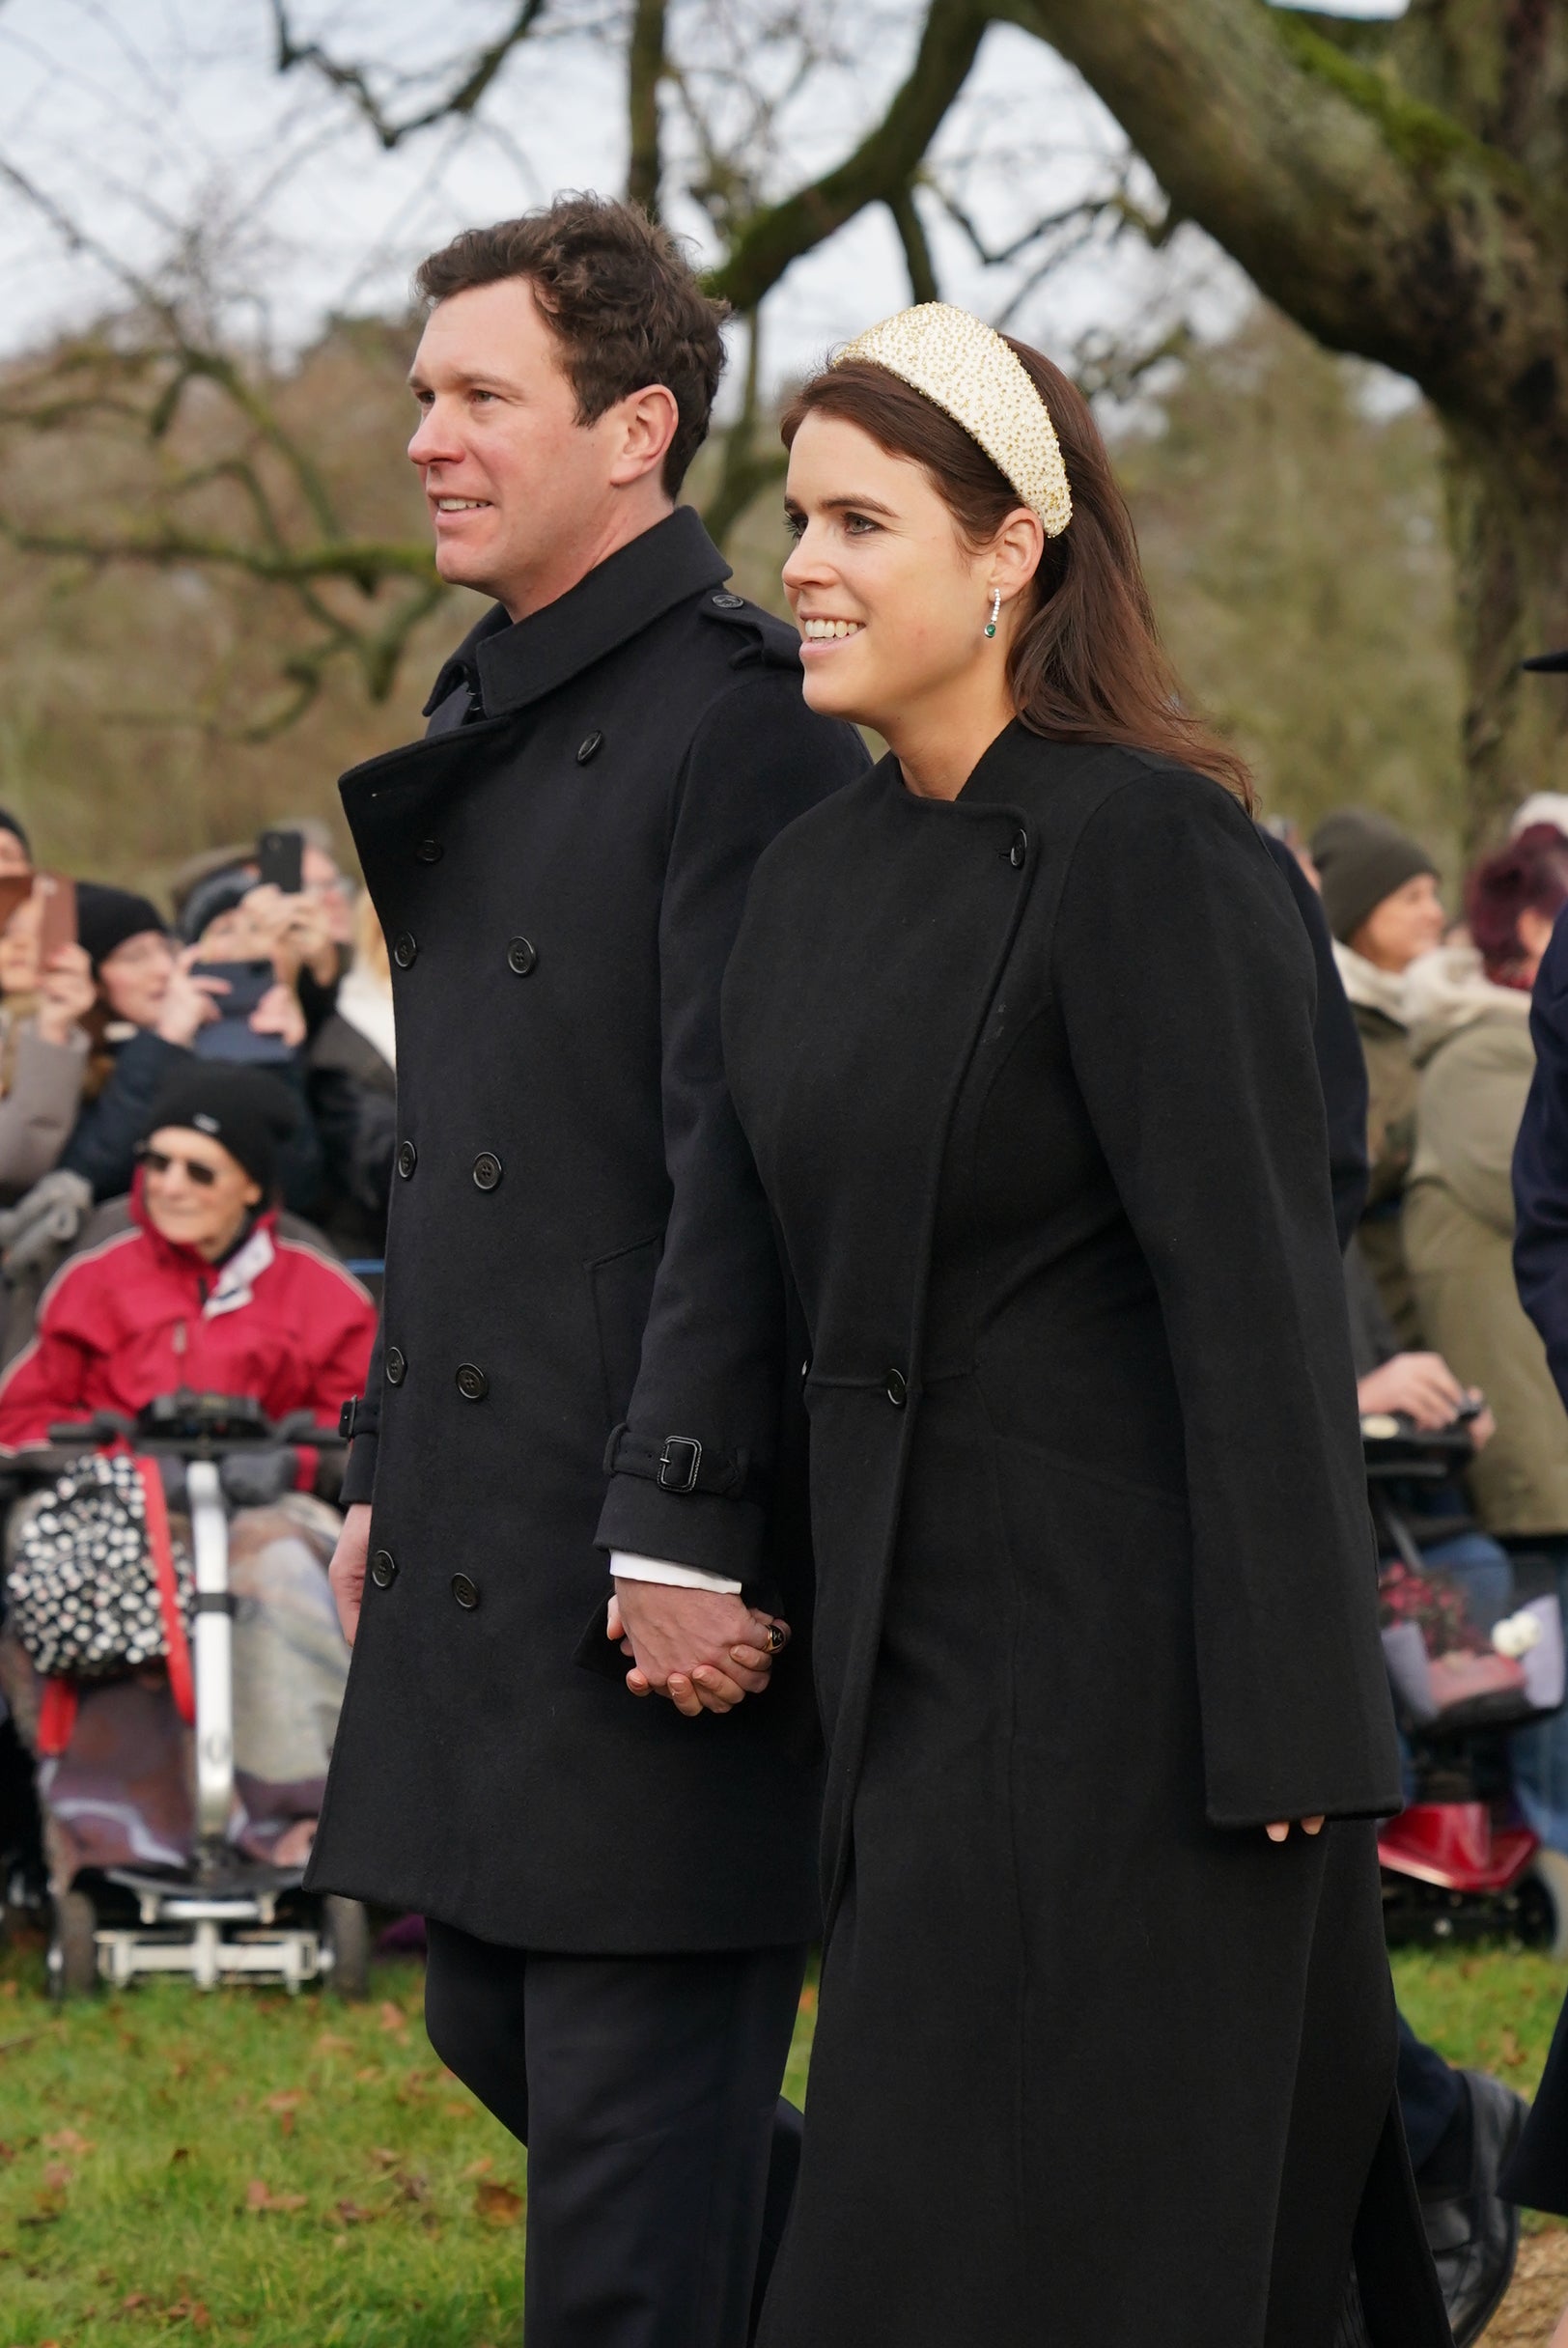 ack Brooksbank and Princess Eugenie attending the Christmas Day morning church service at St Mary Magdalene Church in Sandringham, Norfolk